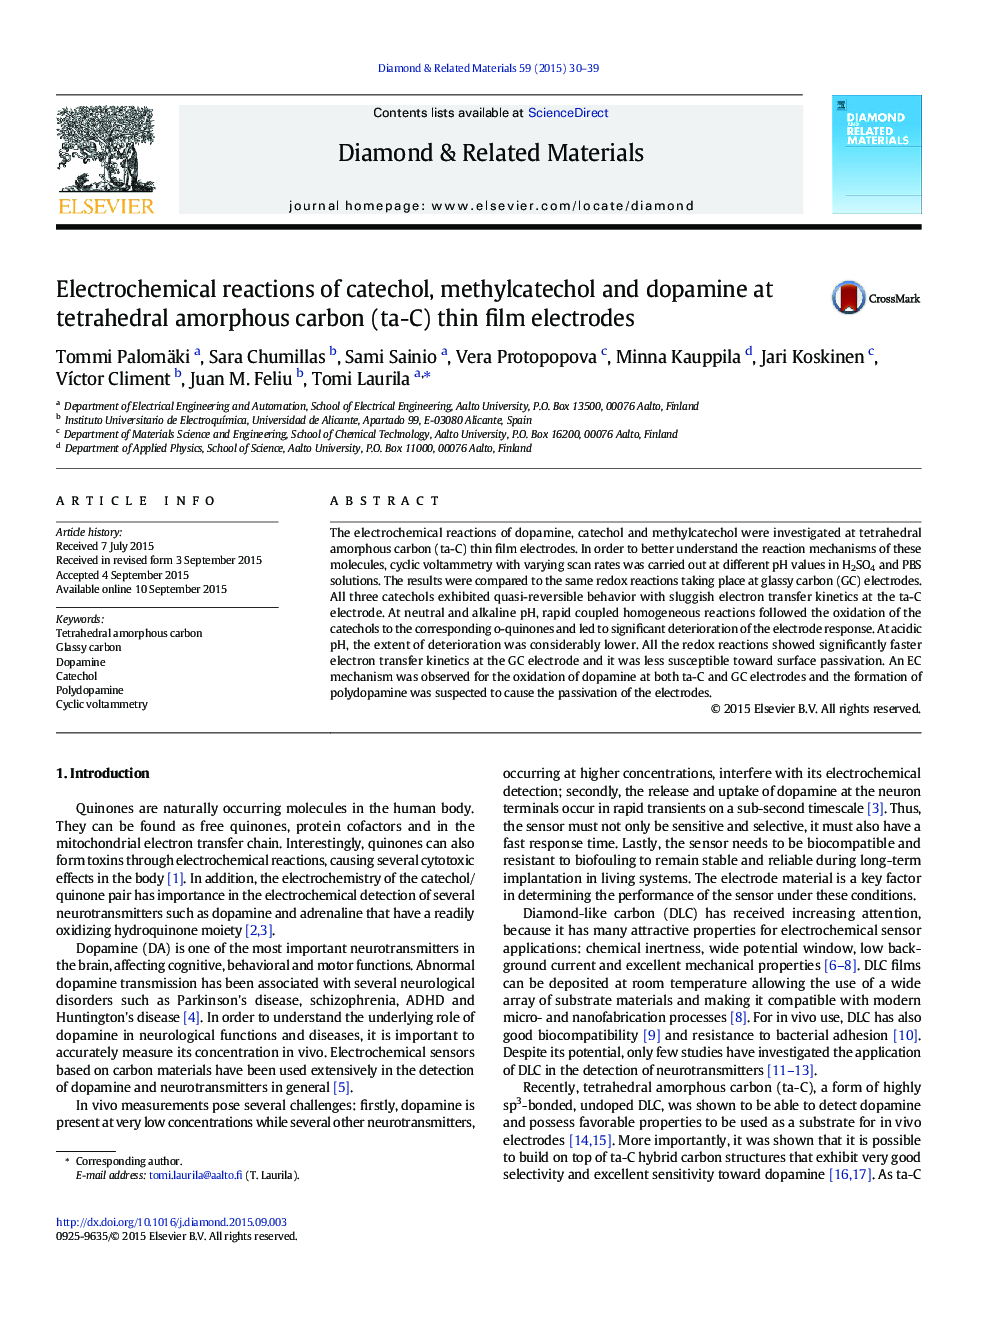 Electrochemical reactions of catechol, methylcatechol and dopamine at tetrahedral amorphous carbon (ta-C) thin film electrodes